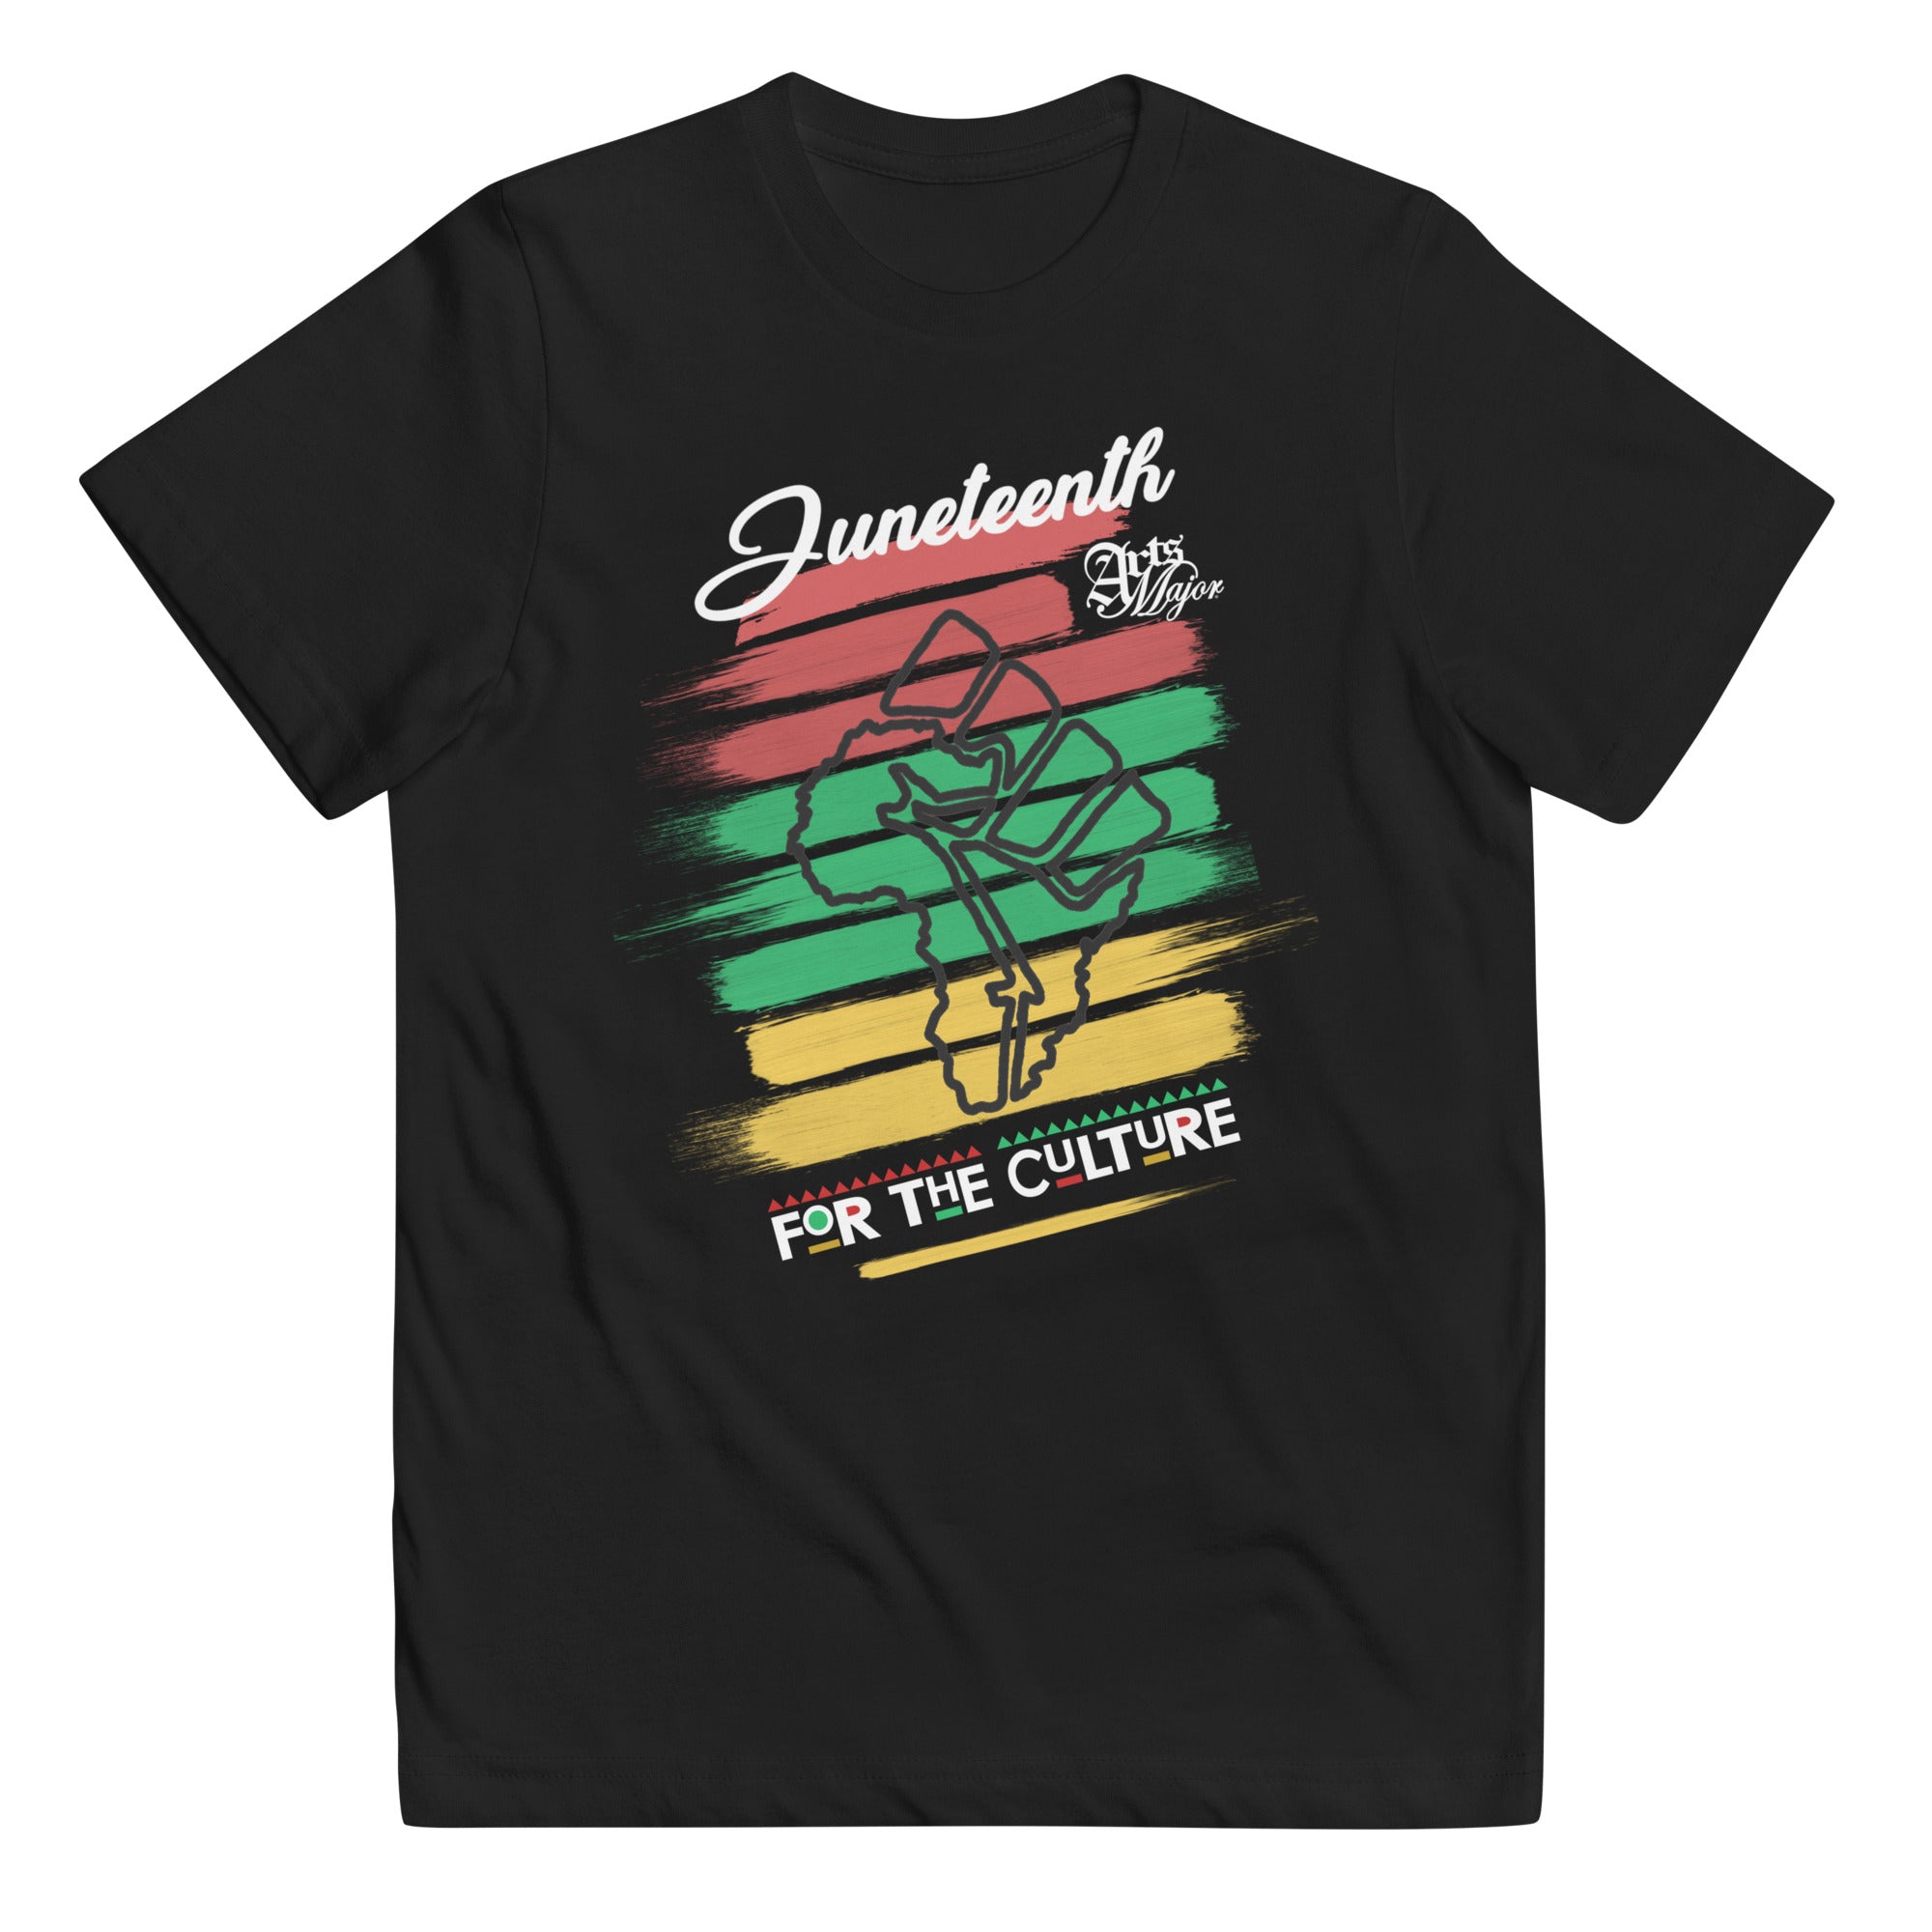 AM | Juneteenth "For The Culture" Kids Tee